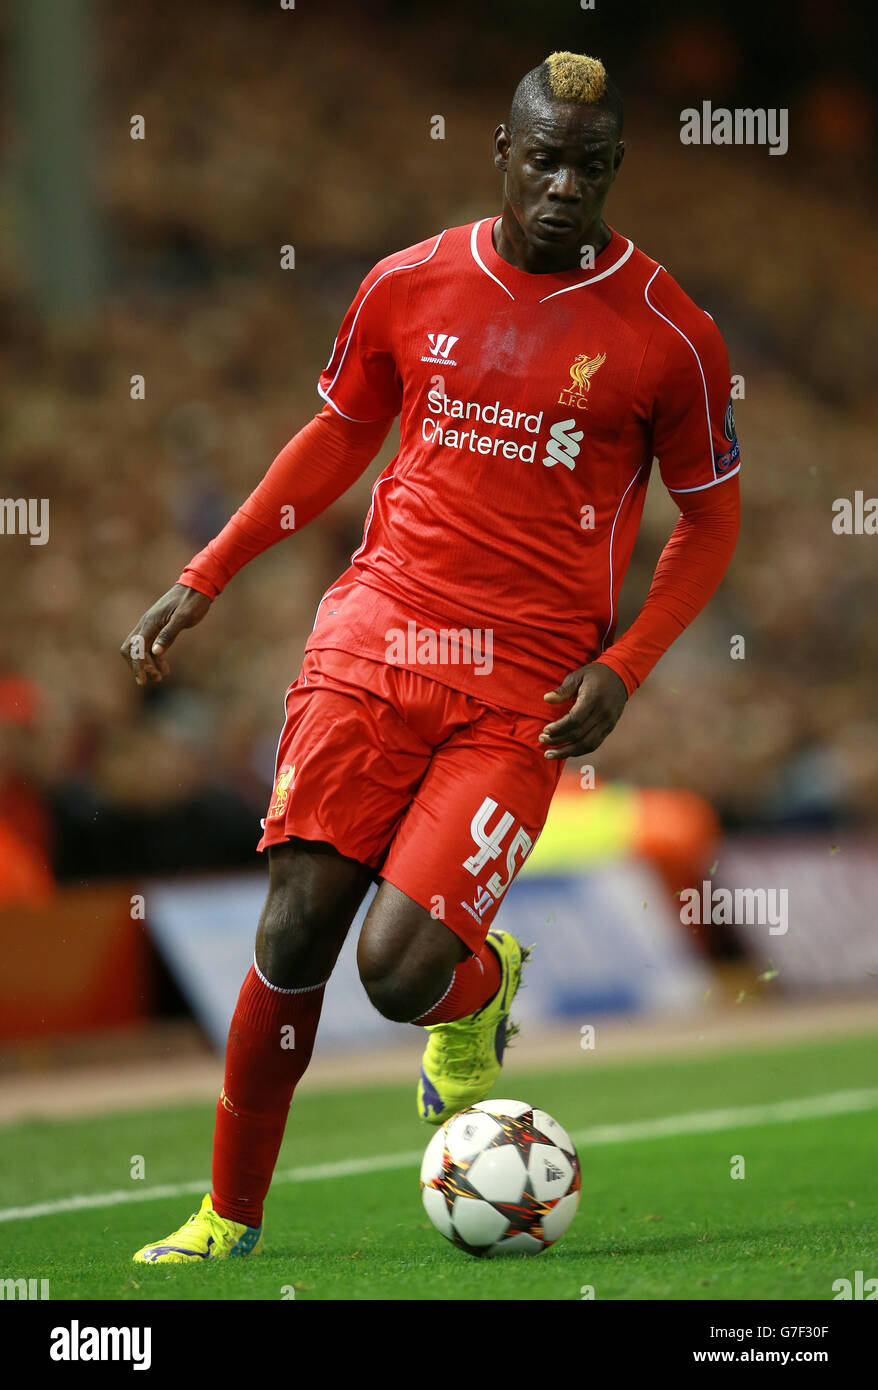 Soccer - UEFA Champions League - Group B - Liverpool v Real Madrid - Anfield. Liverpool's Mario Balotelli during The UEFA Champions League match at Anfield, Liverpool. Stock Photo